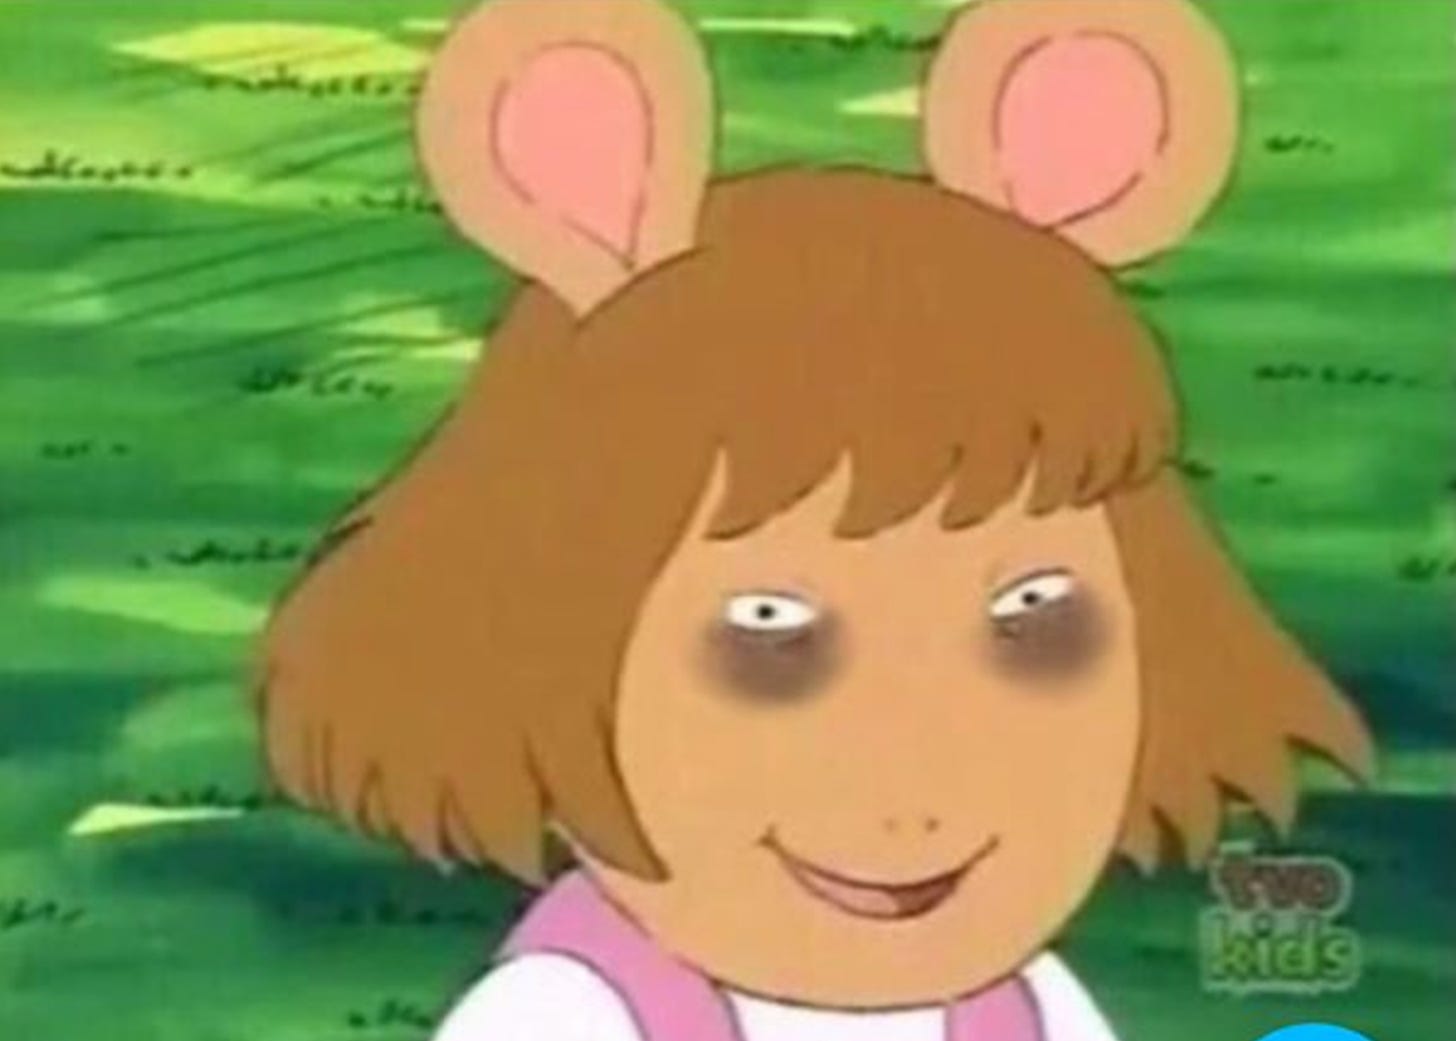 dw (from the children's tv show arthur) with dark circles under her eyes